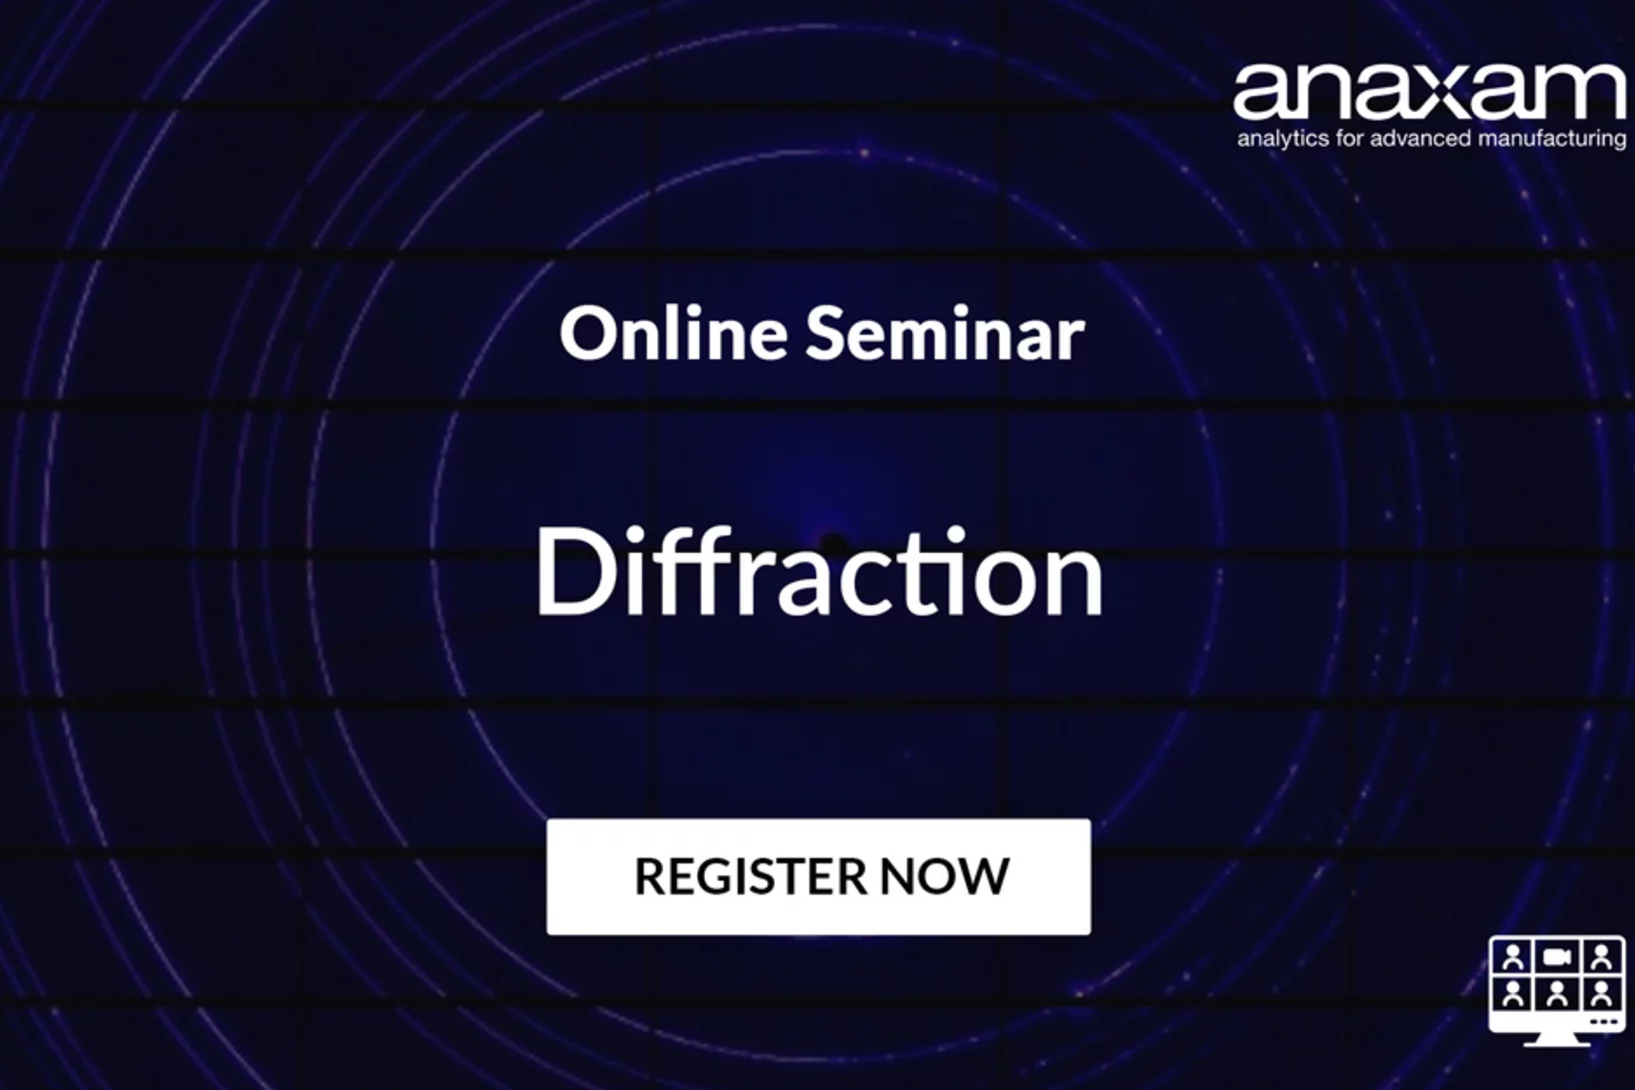 Seminar "Diffraction for Industrial Applications": Learn how ANAXAM can help your business!